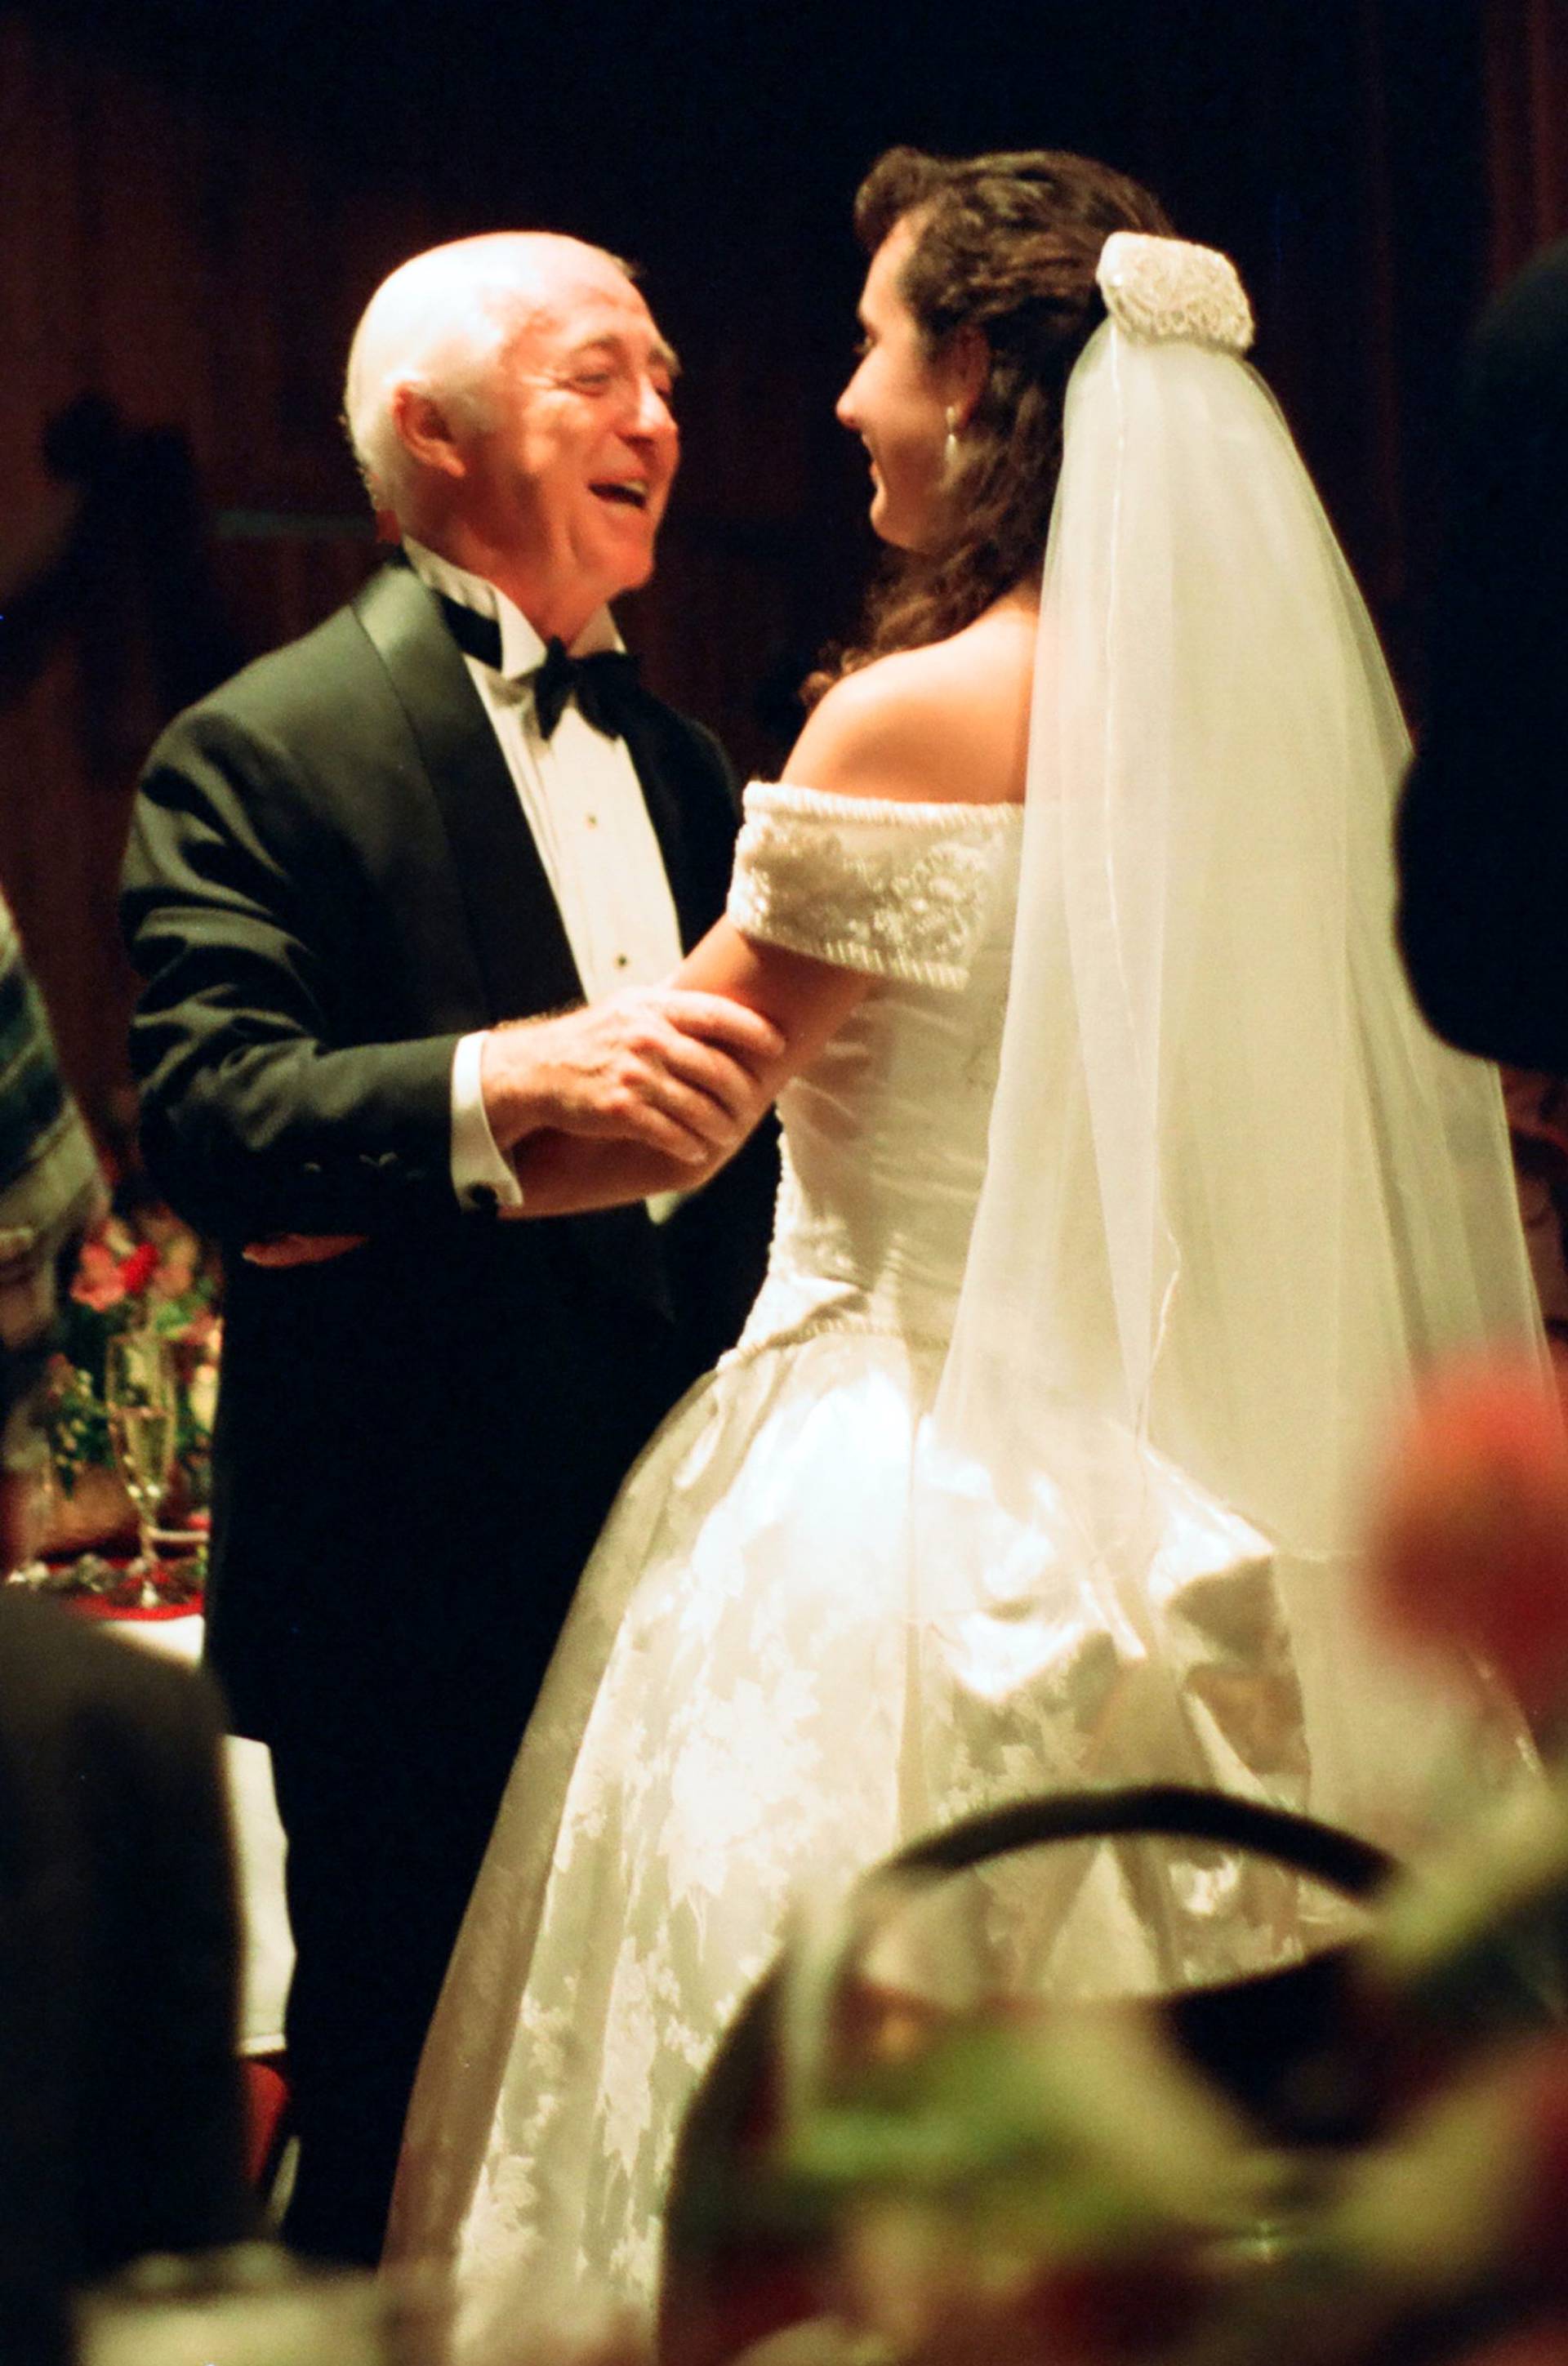 The author with her father-in-law on her wedding day